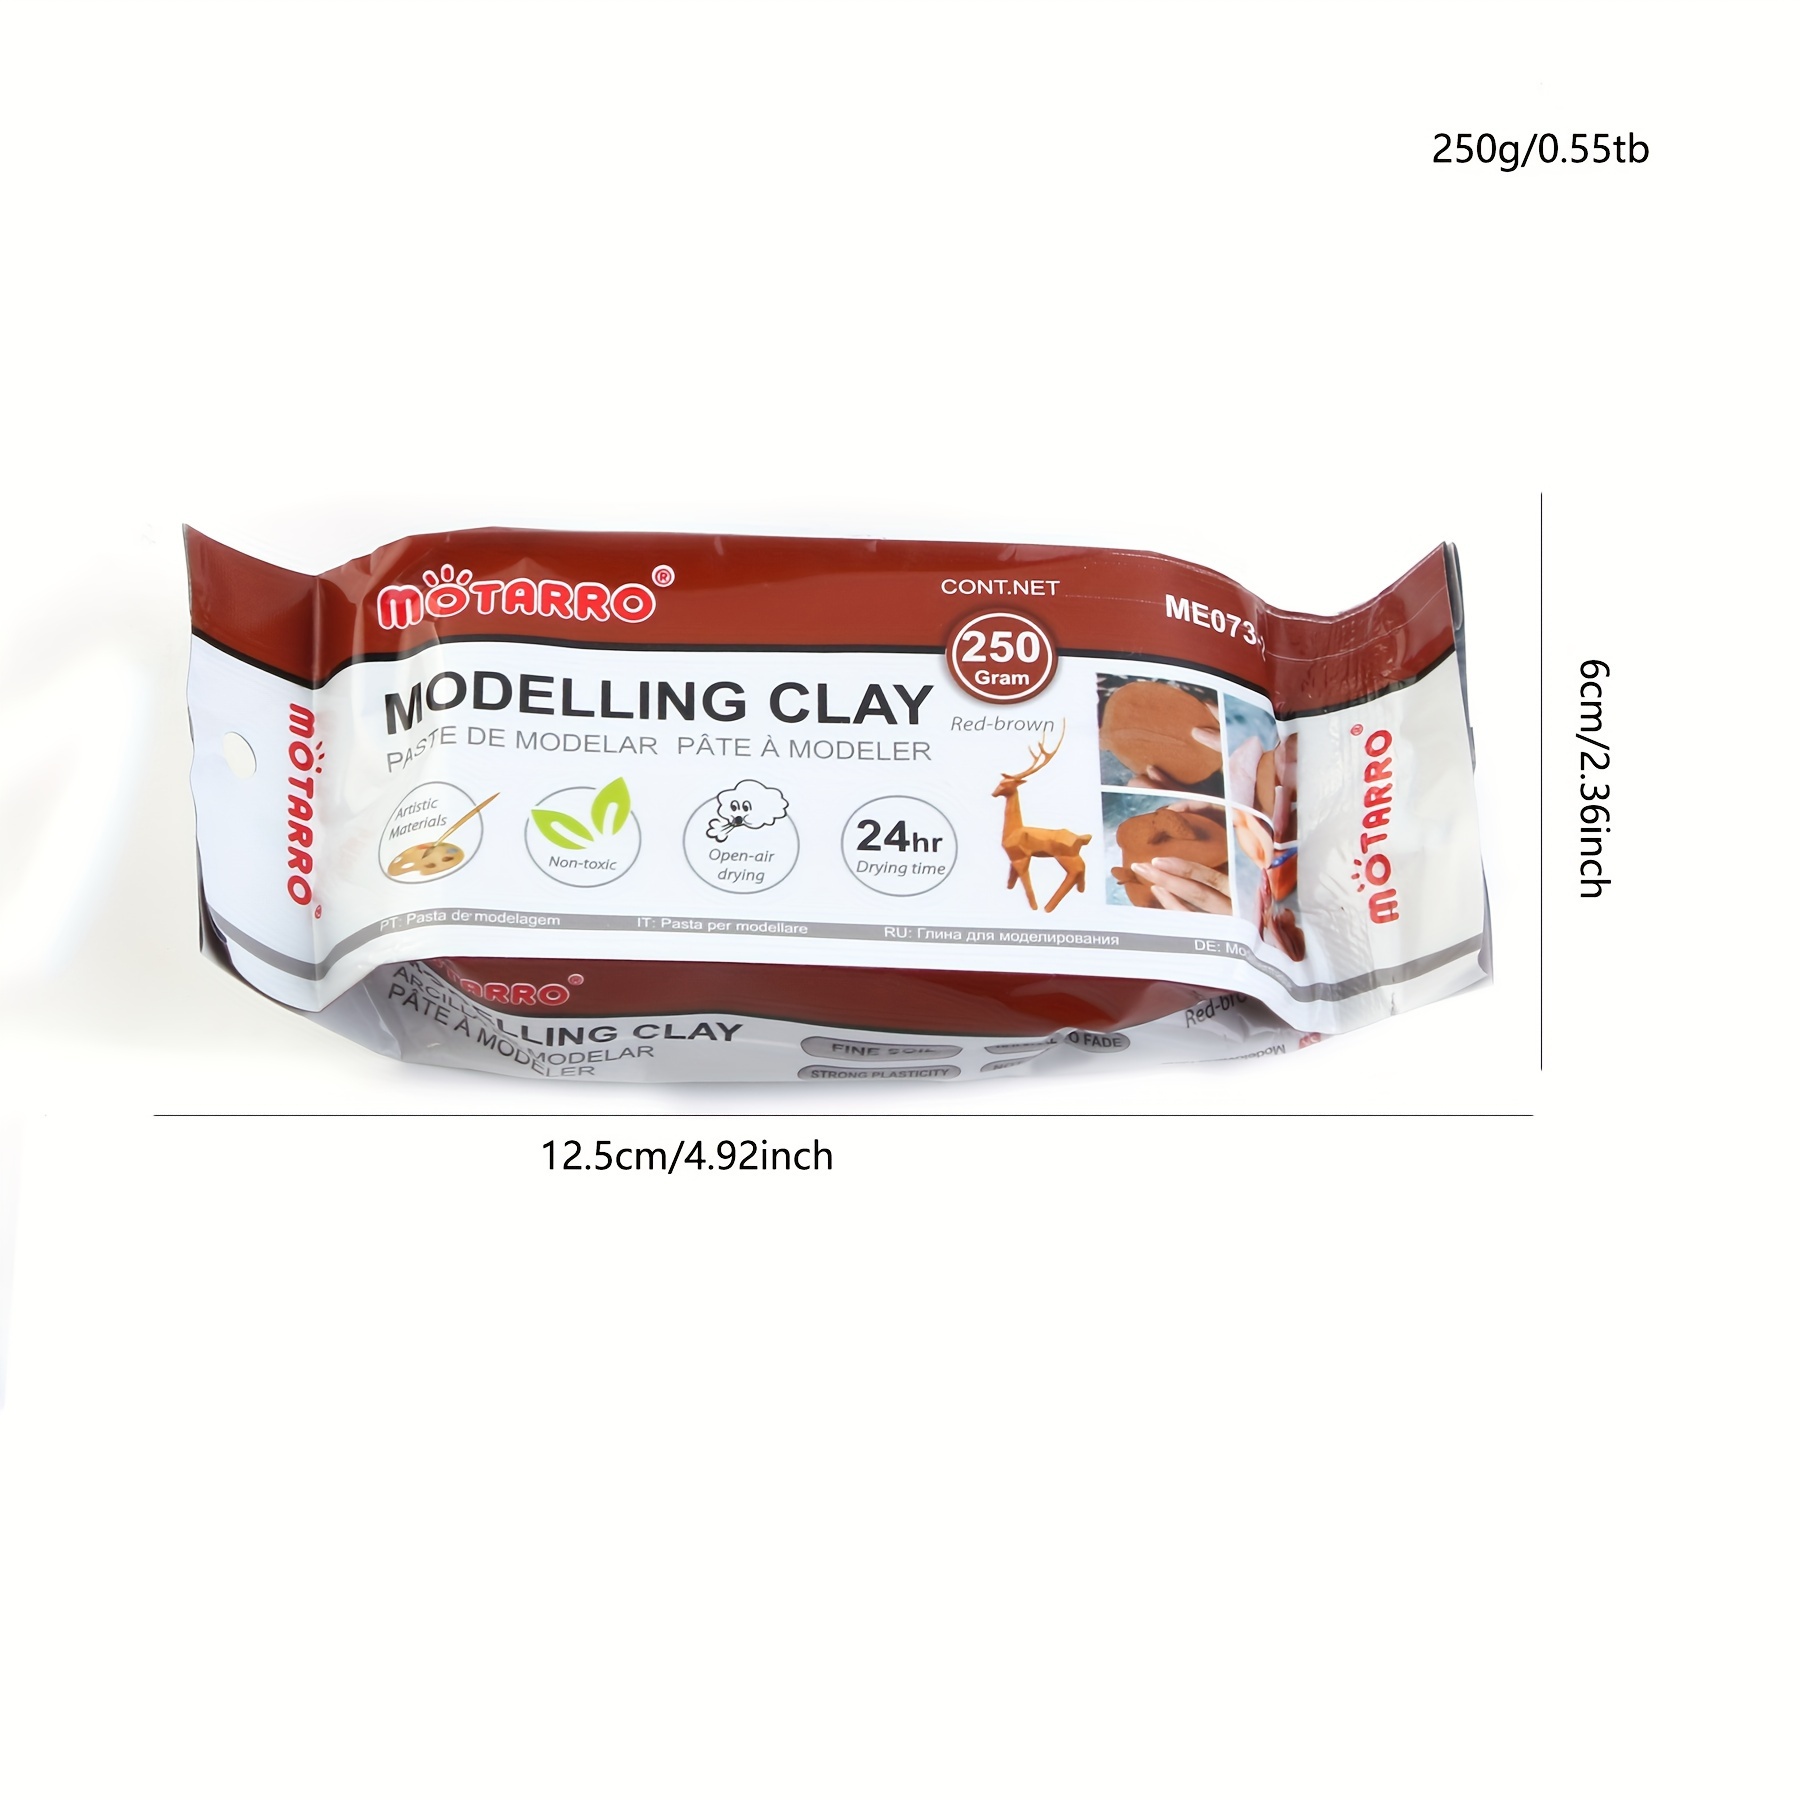 Mexo Red Air Drying Clay, 5 lbs.